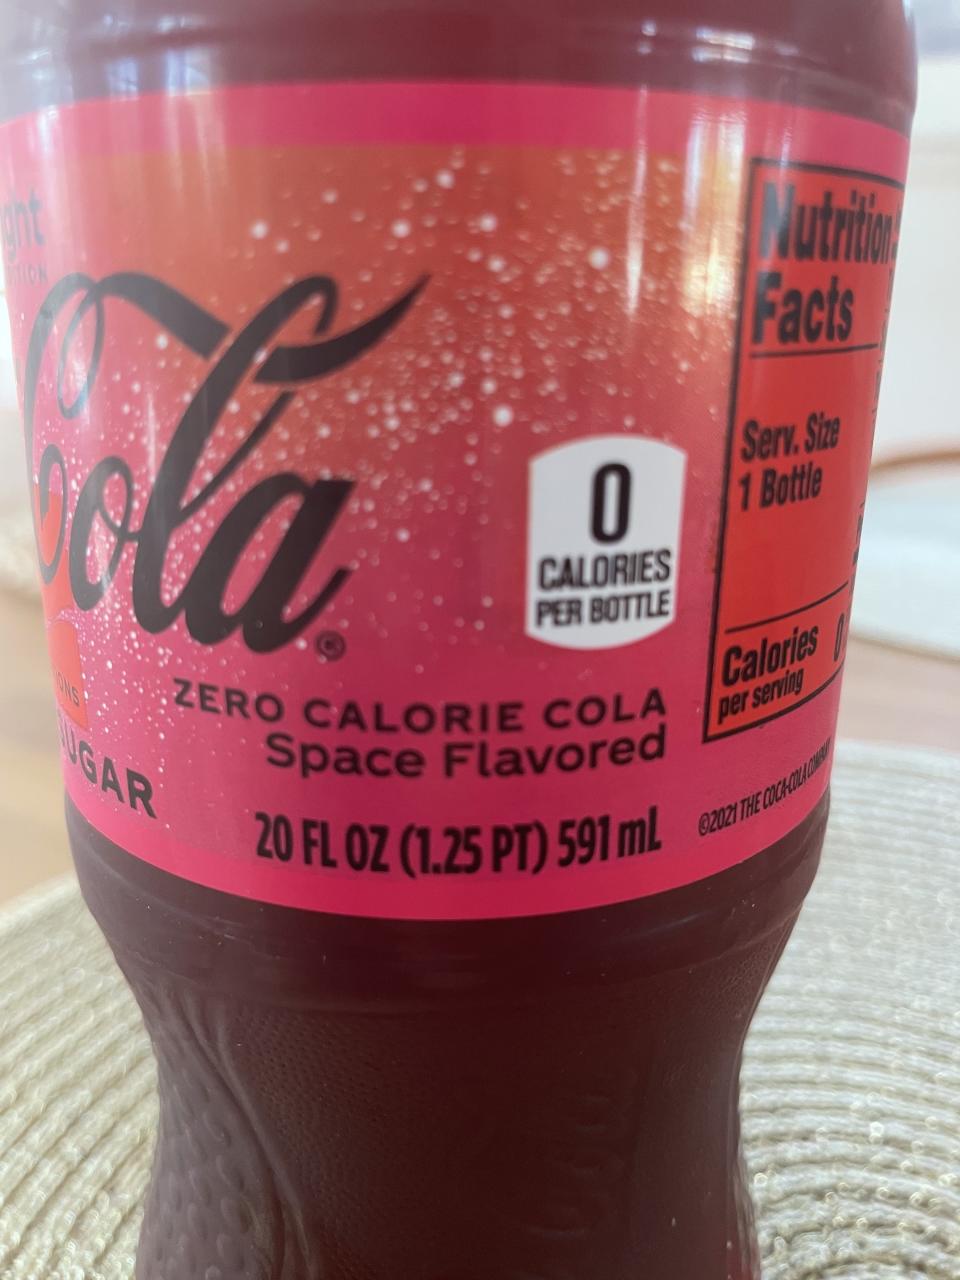 A close-up of the label, which says, "Zero calorie cola, space flavored"